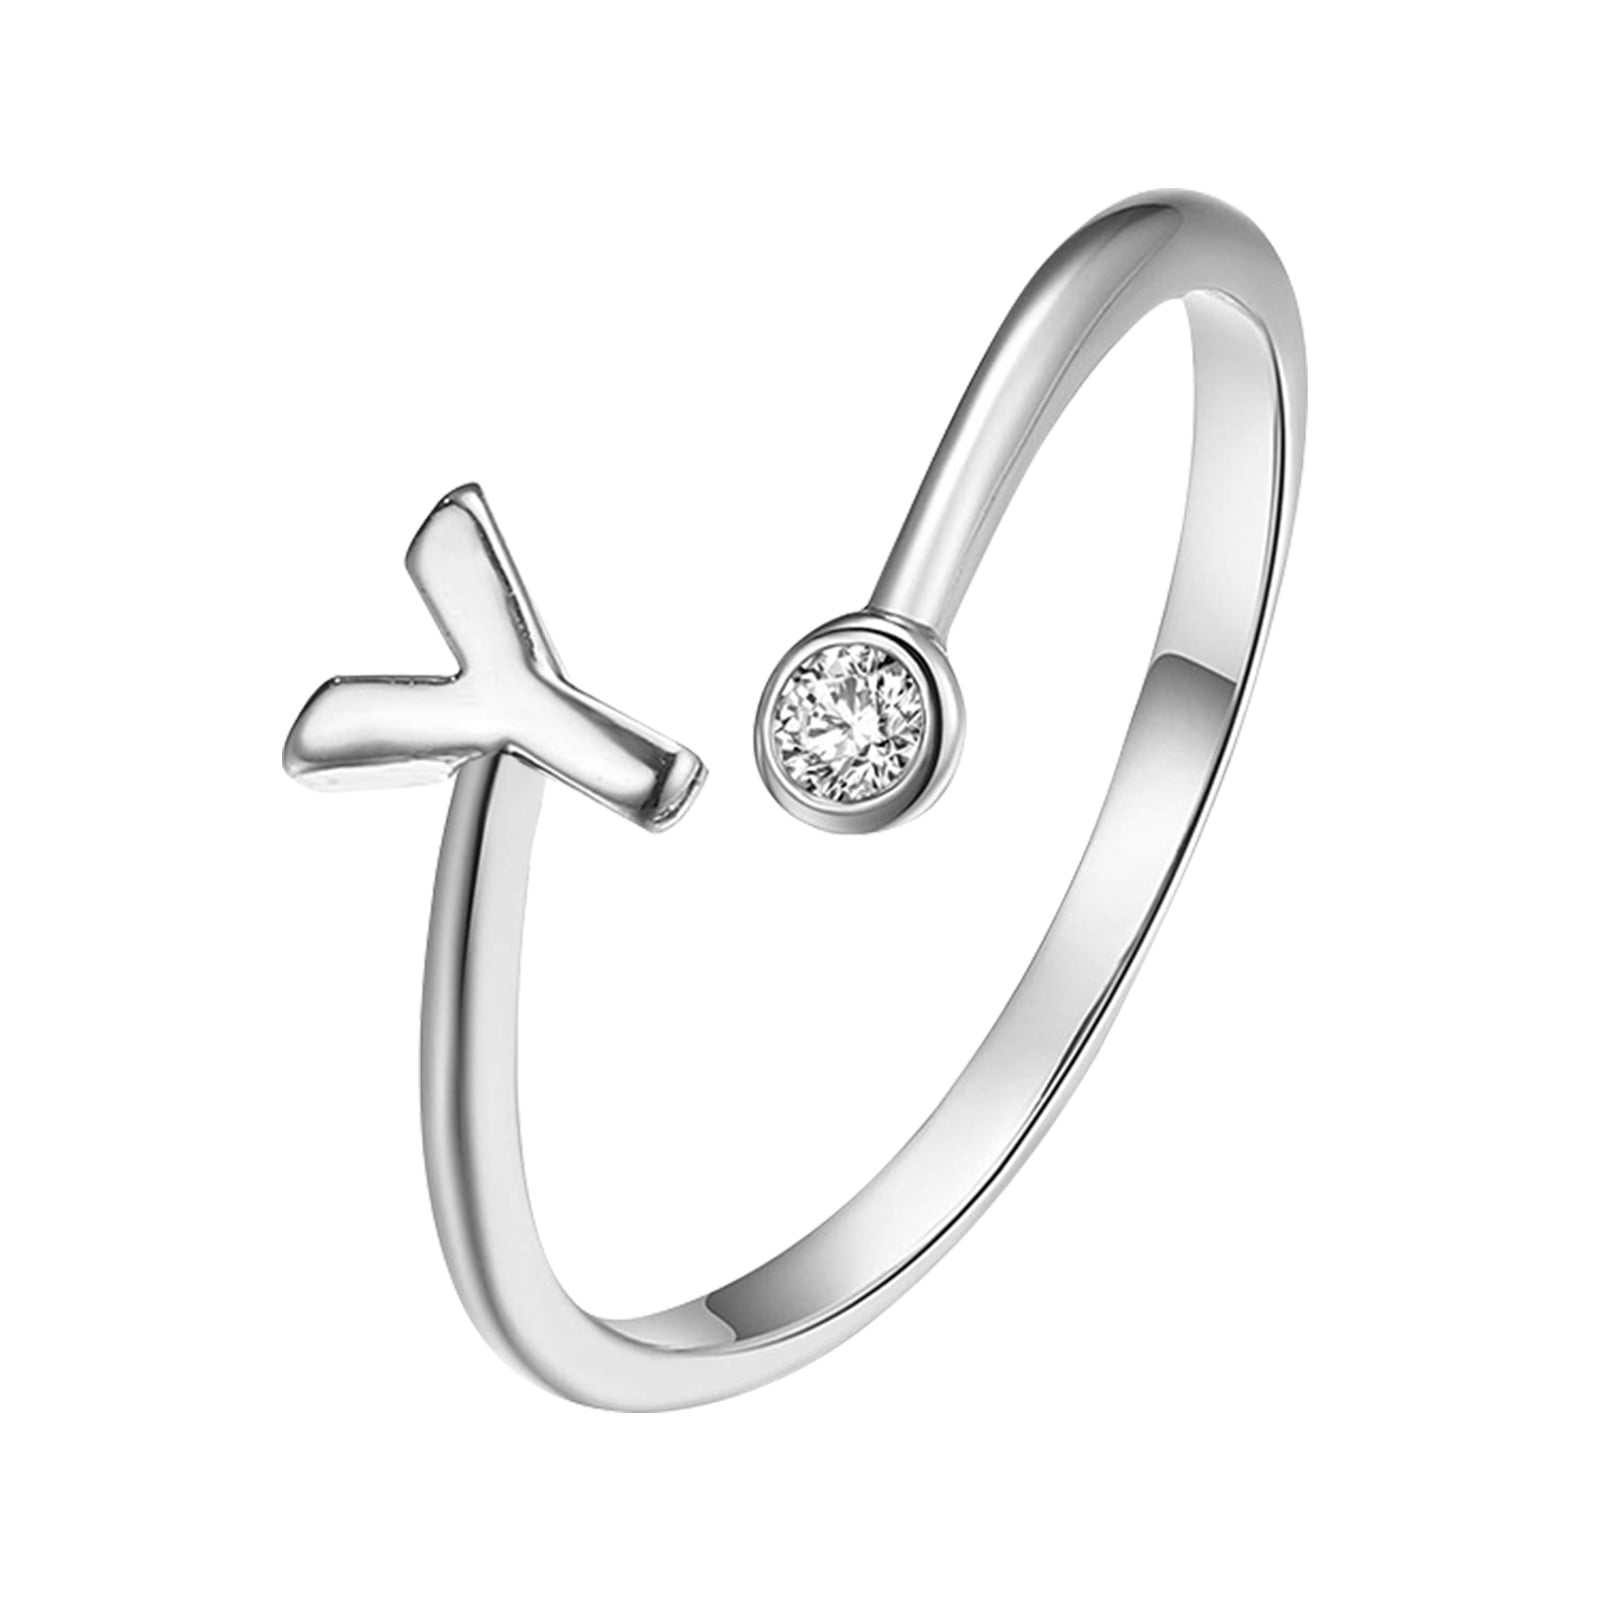 Buy Western Rings for Women Online - Outhouse – Outhouse Jewellery